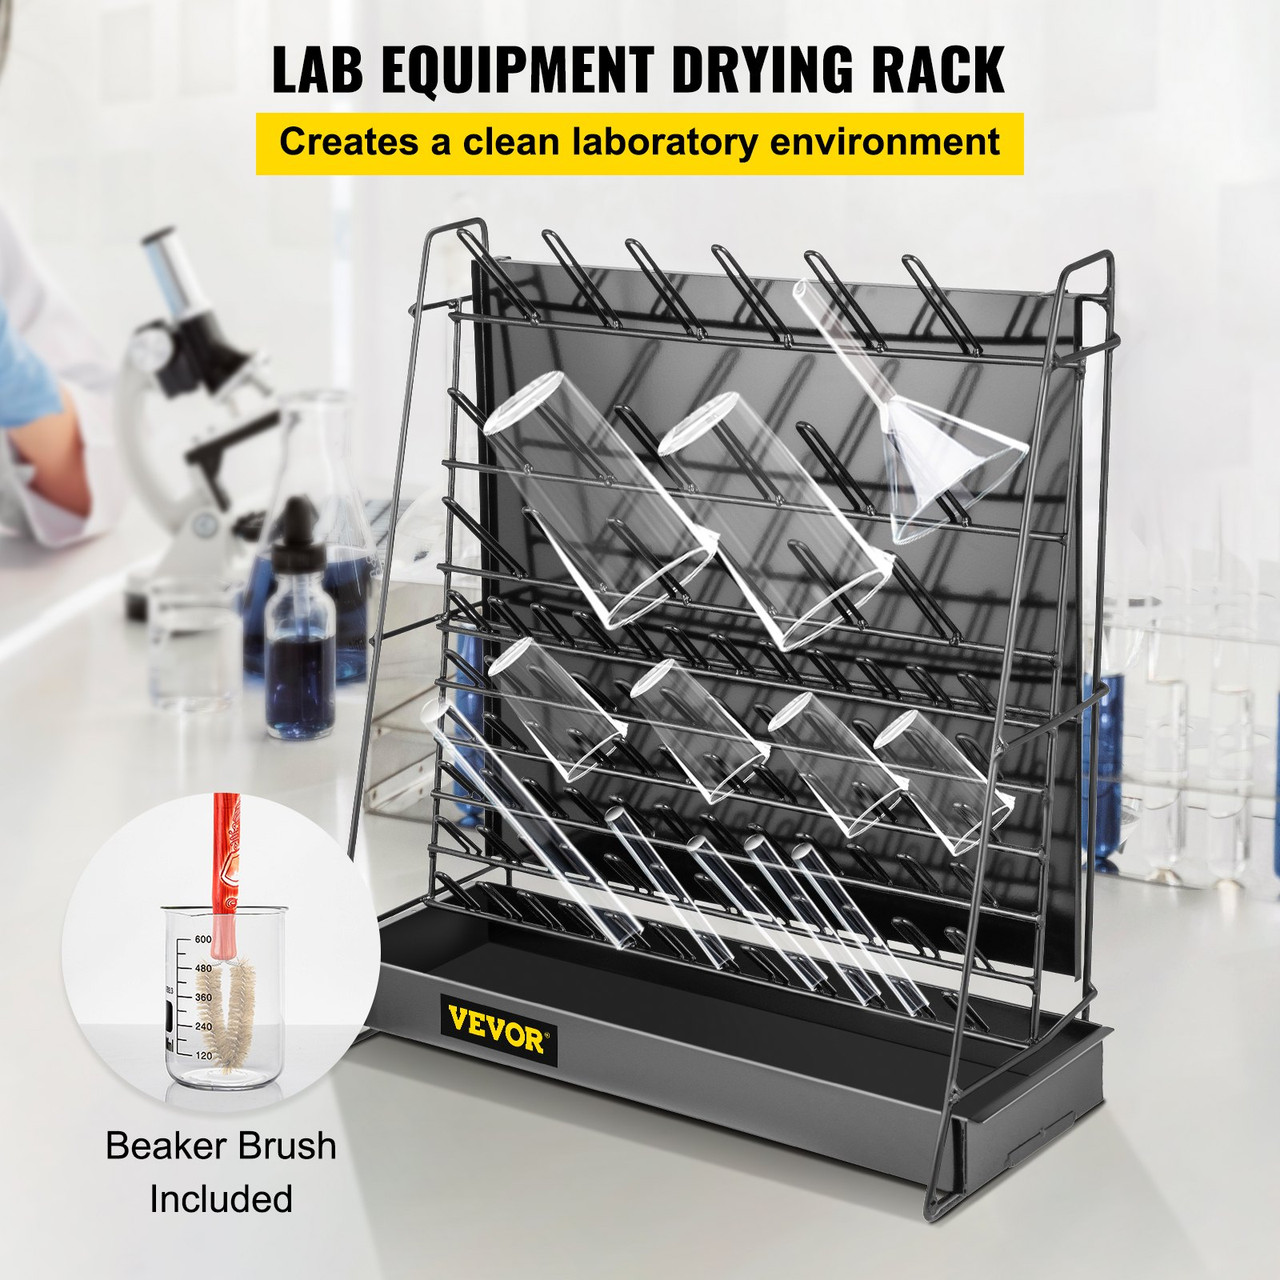 Drying Rack for Lab 90 Pegs Lab Glassware Rack Steel Wire Glassware Drying Rack Wall-Mount/Free-Standing Detachable Pegs Lab Glass Drying Rack Black Cleaning Frame for School Laboratory Utensils